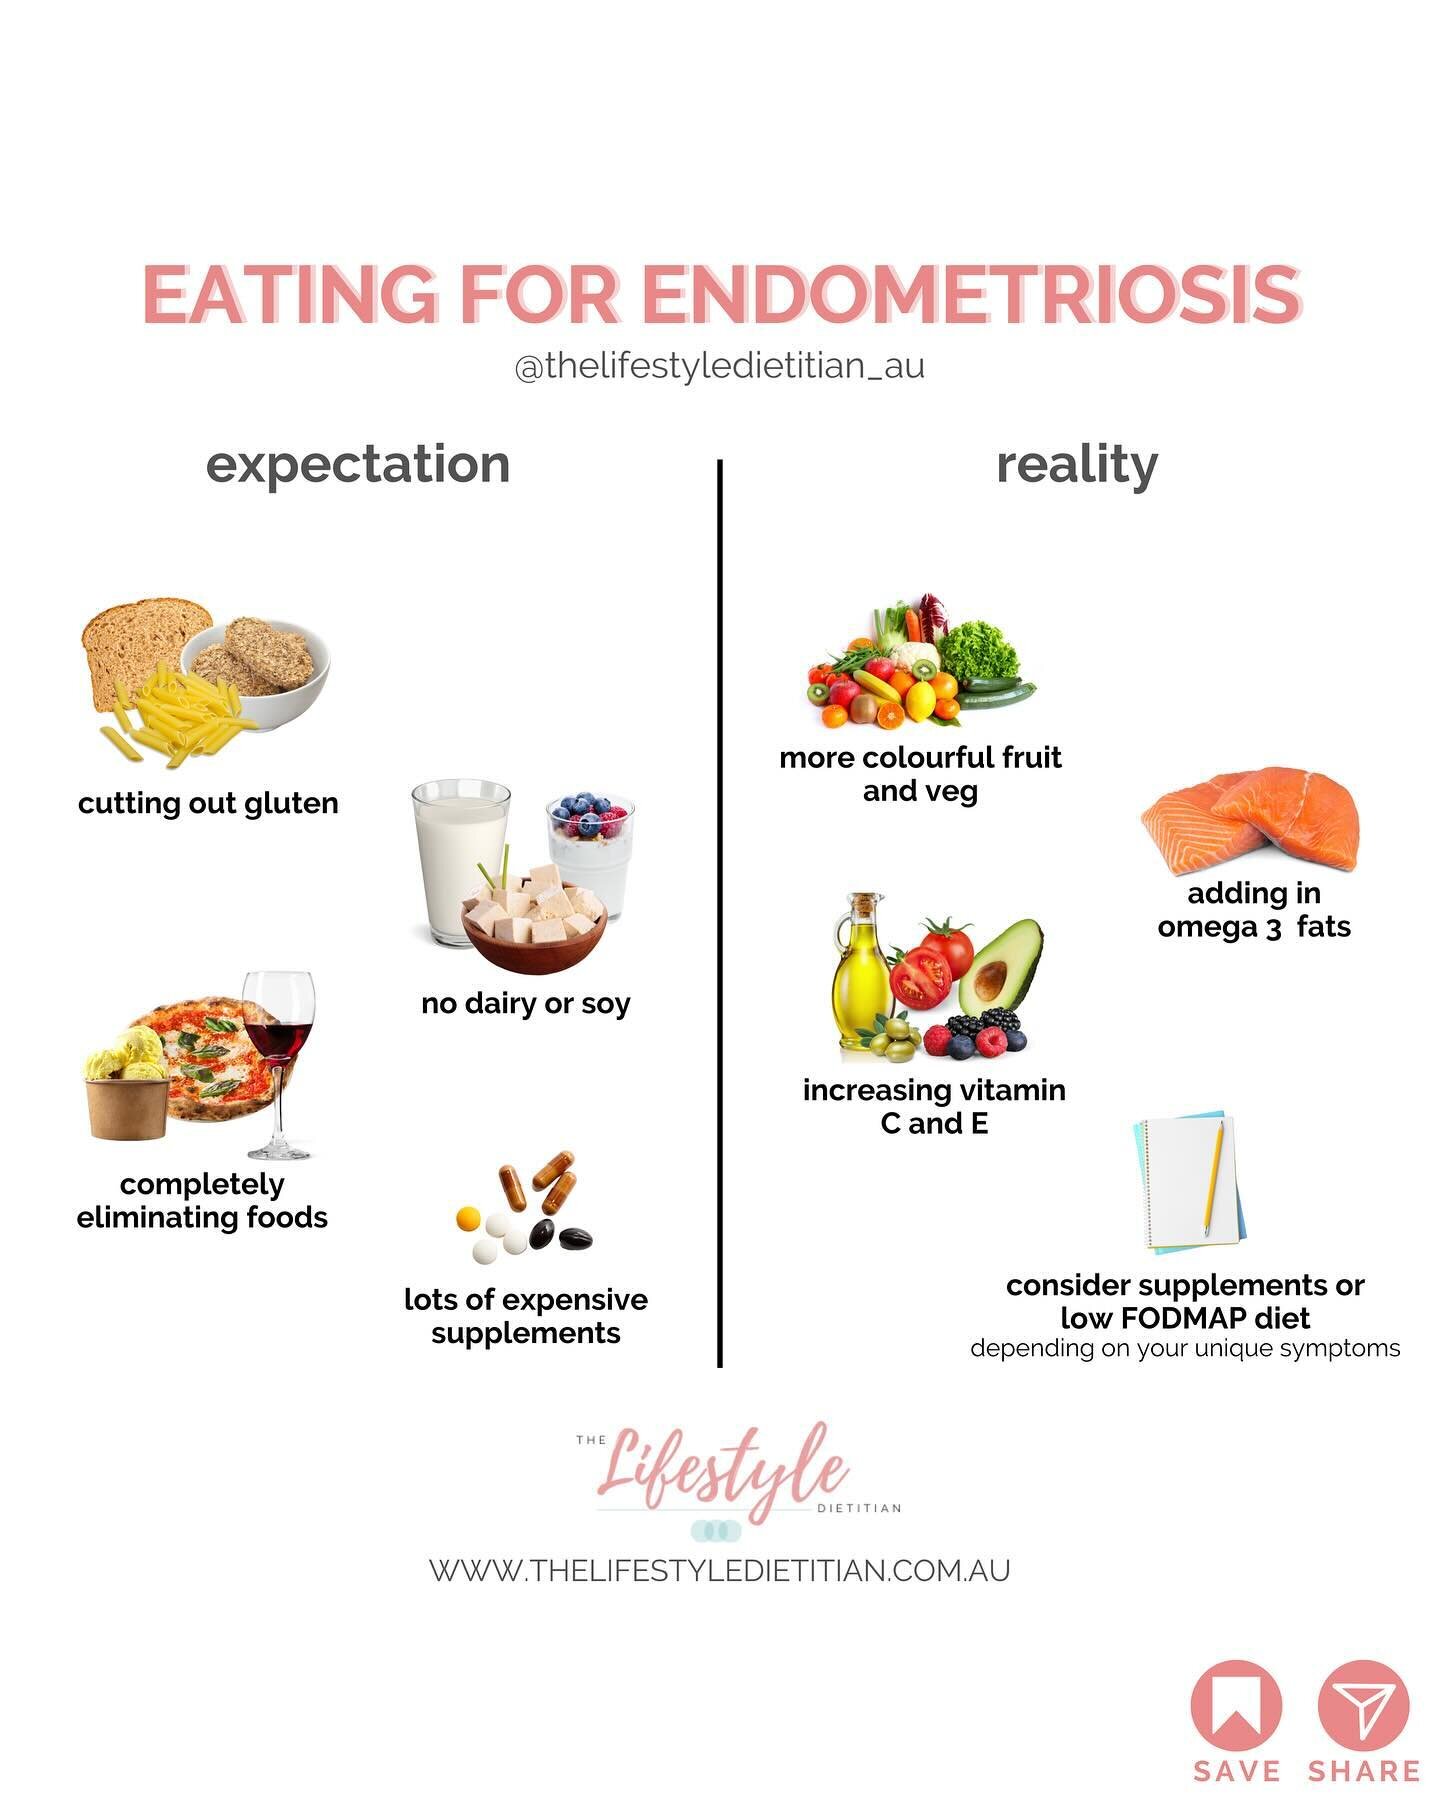 Spoiler alert: the best diet for endo is not one-size-fits-all. It&rsquo;s eating an overall anti-inflammatory &ldquo;dietary pattern&rdquo;.

Like Dietitian Jess says (swipe to see a snippet of her speaking on an endo expert panel with @geneafertili